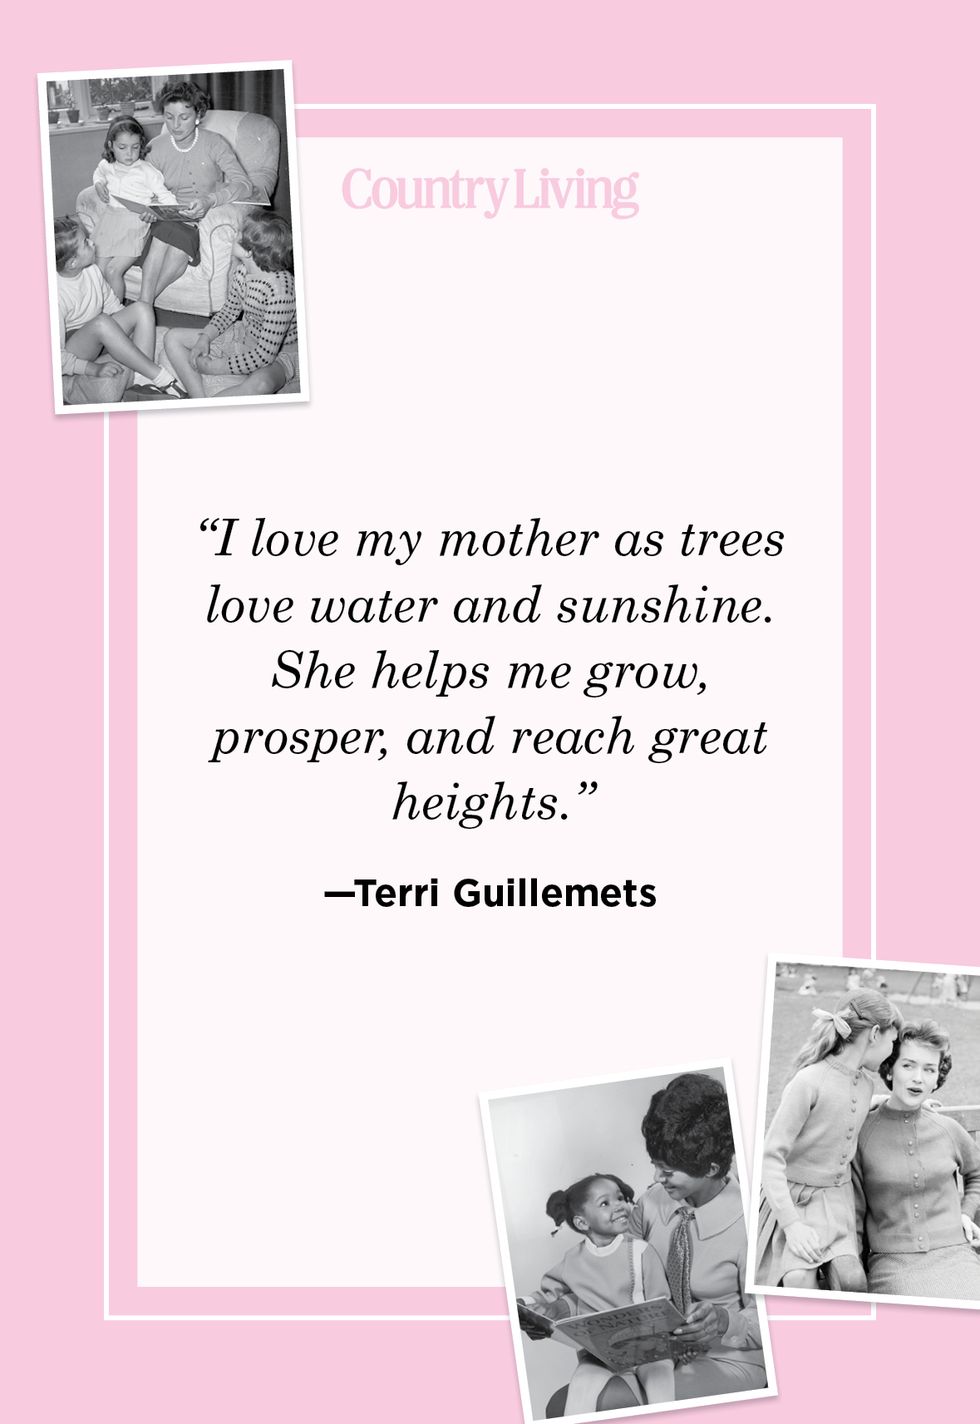 https://hips.hearstapps.com/hmg-prod/images/mothers-day-quotes-10-terri-guillemets-6413ed40e7252.jpg?crop=1xw:1xh;center,top&resize=980:*